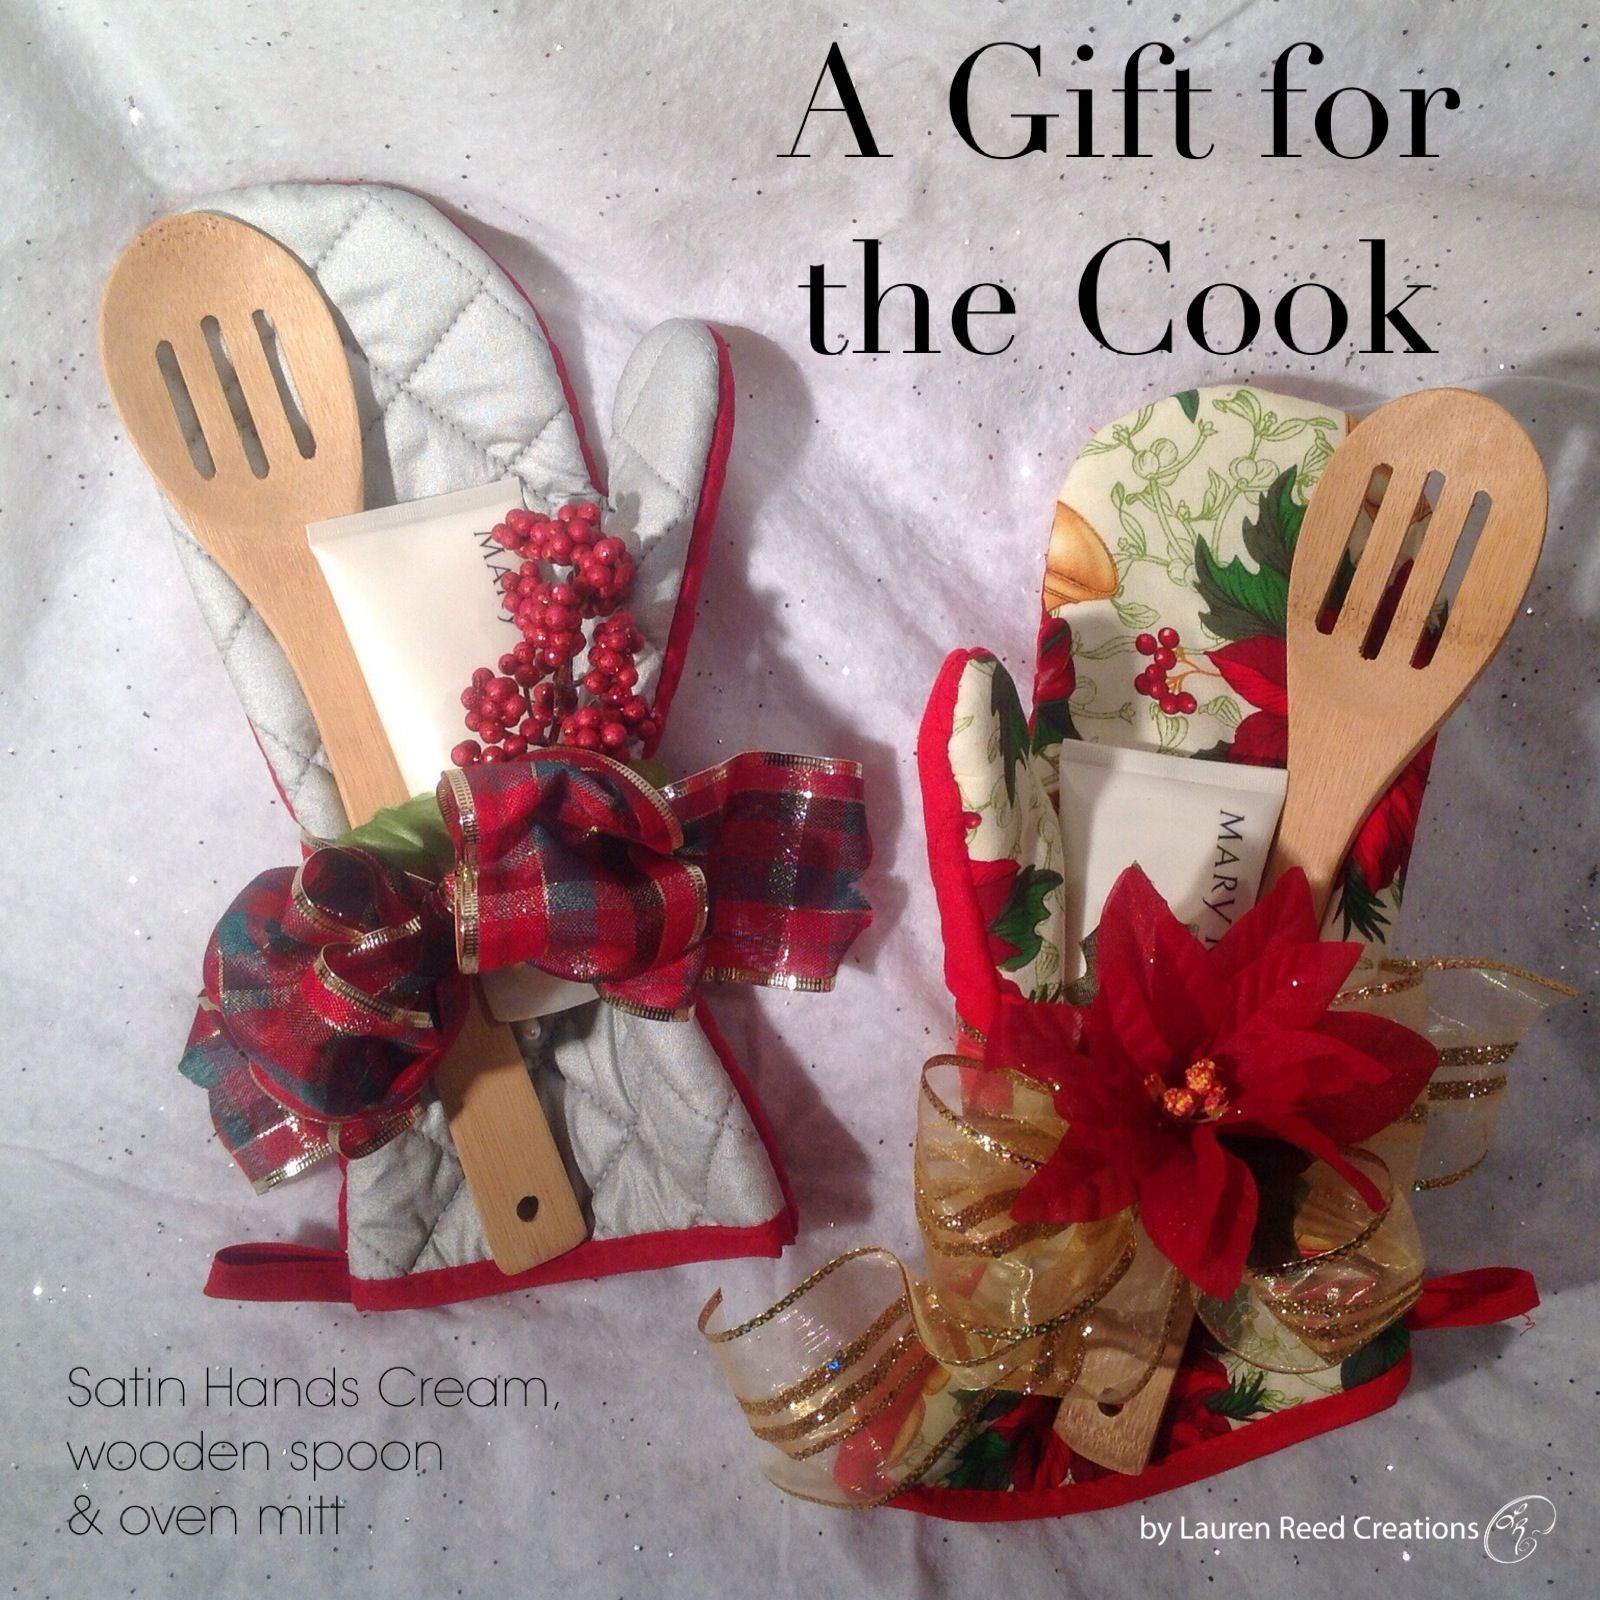 Mary Kay Holiday Gift Ideas
 A Gift for the Cook $13 marykayus